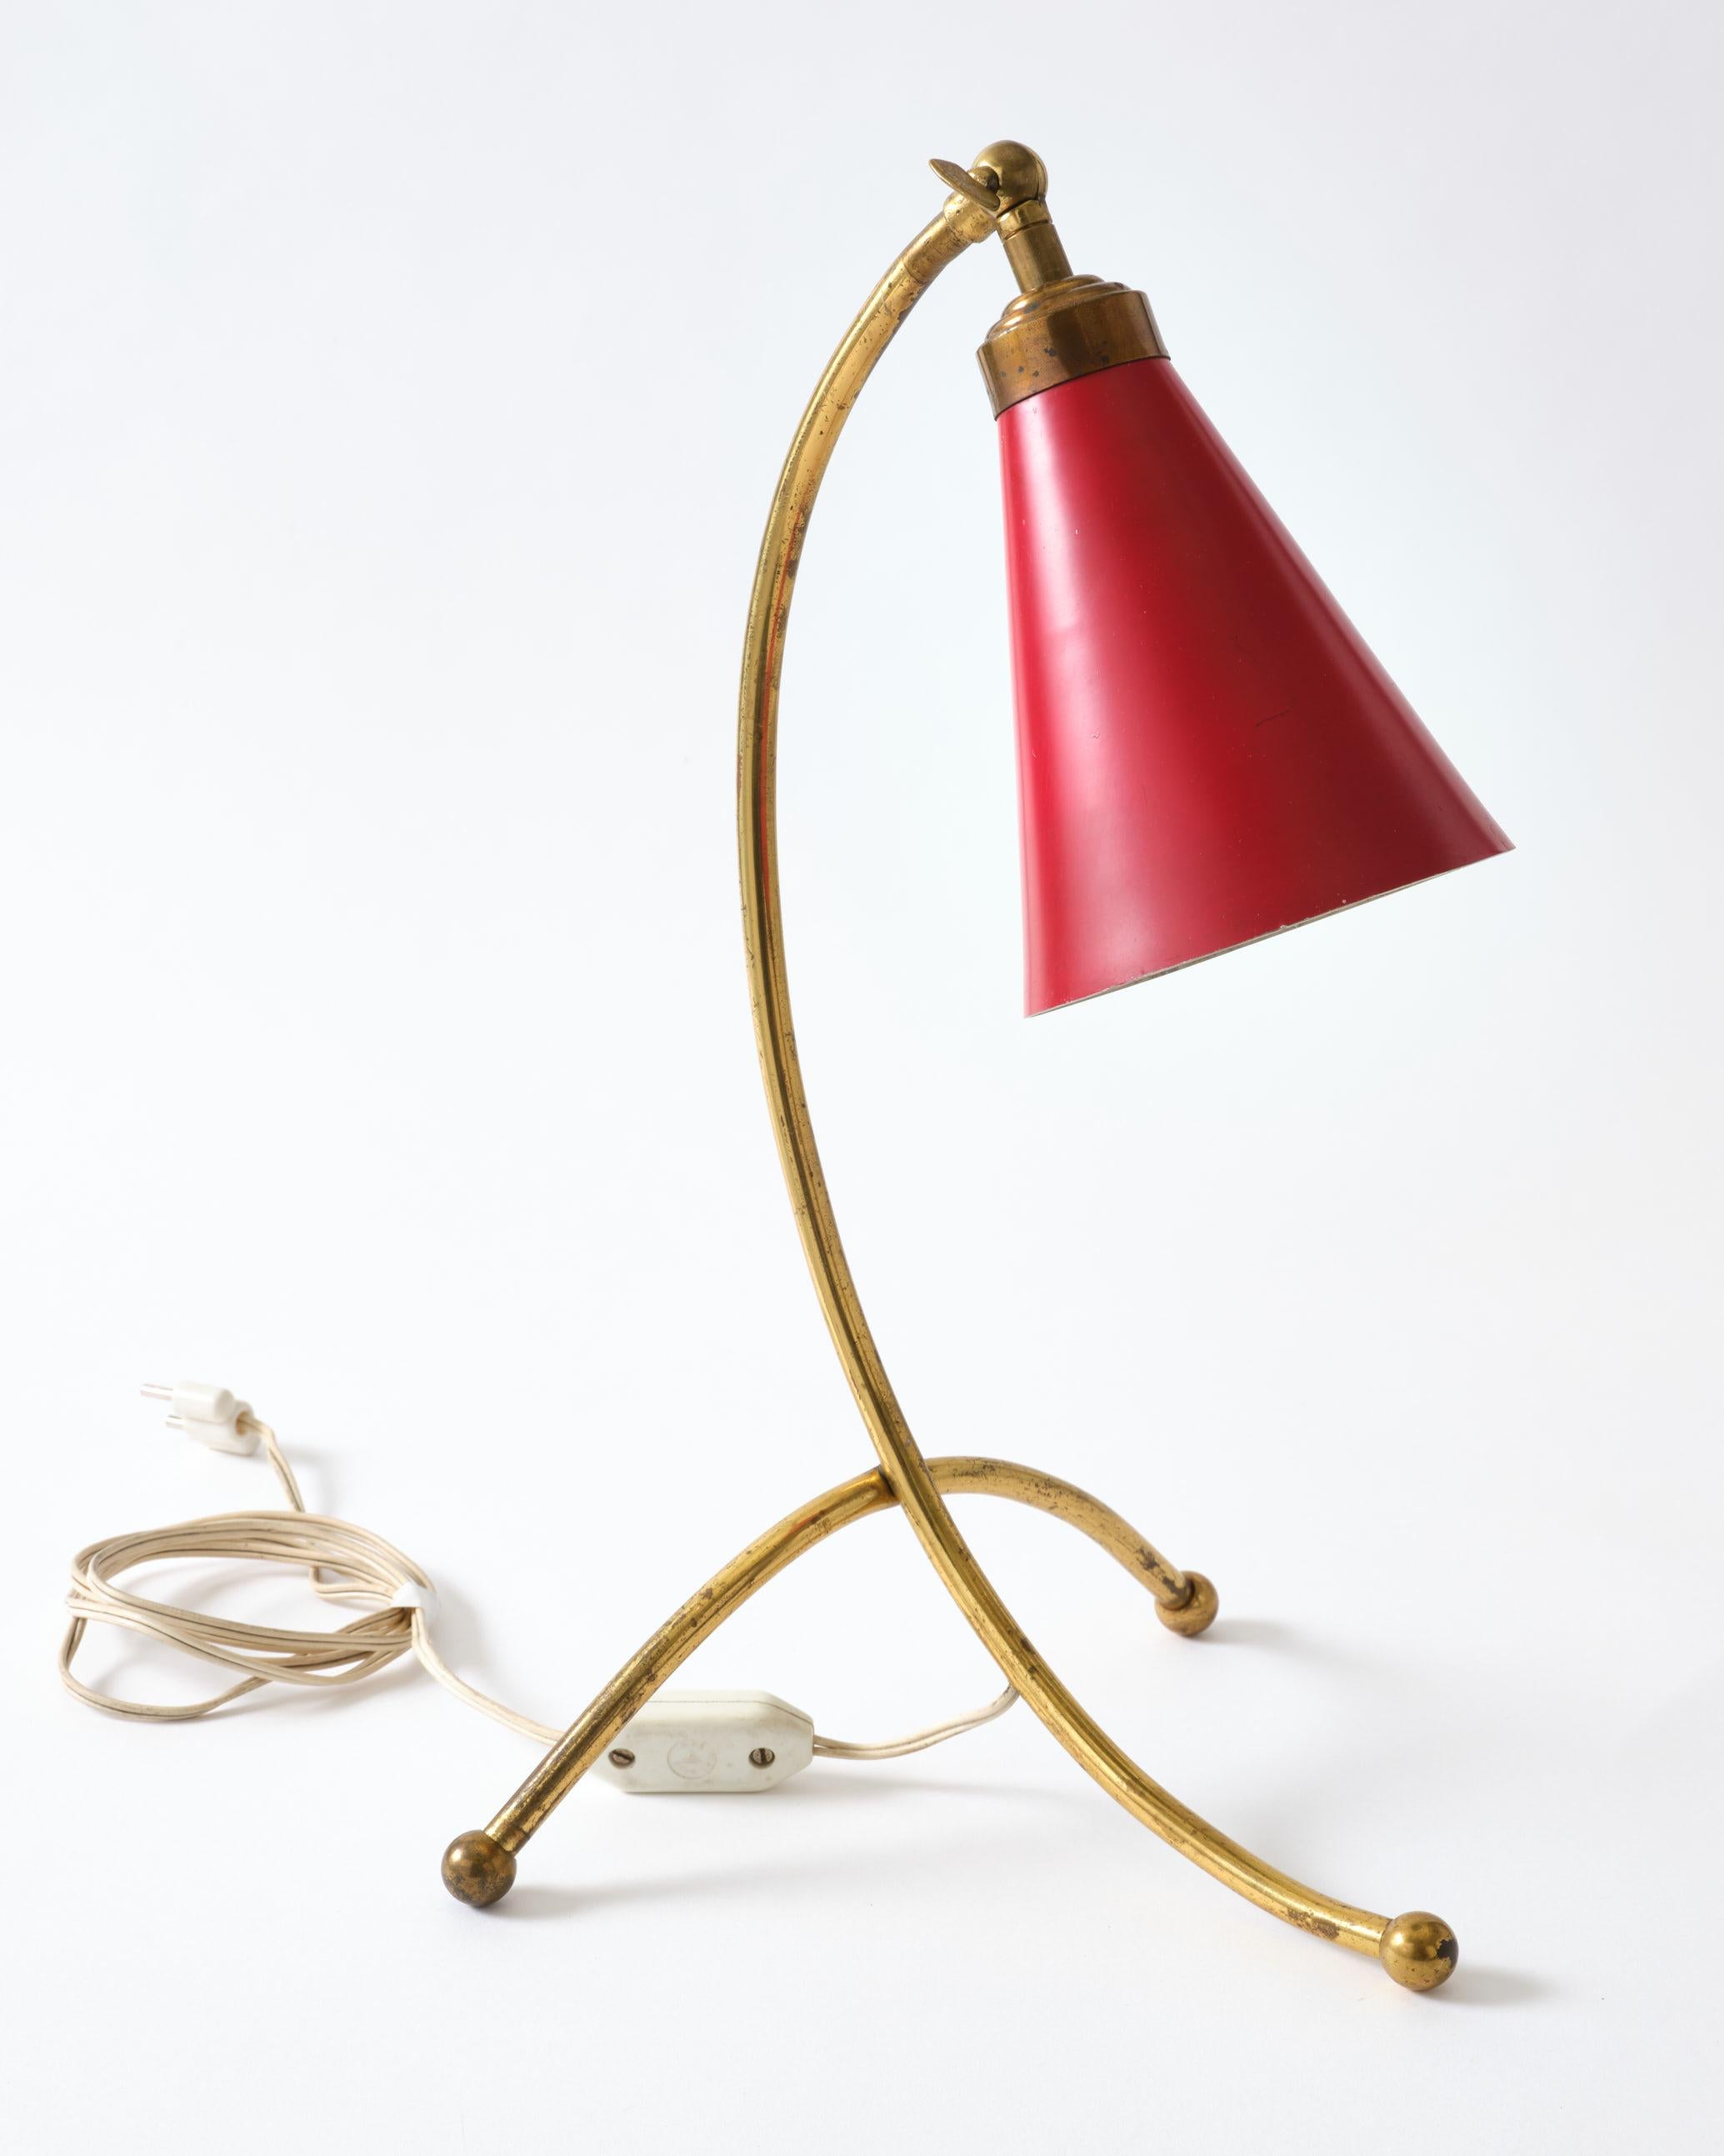 Brass table lamp with a red metal shade. This lamp is from Italy, C 1950.
The lamp has not been polished. The lamp is in original condition.
The lamp will come with a small transformer so it can be used in the USA market.
It is a beautiful Italian